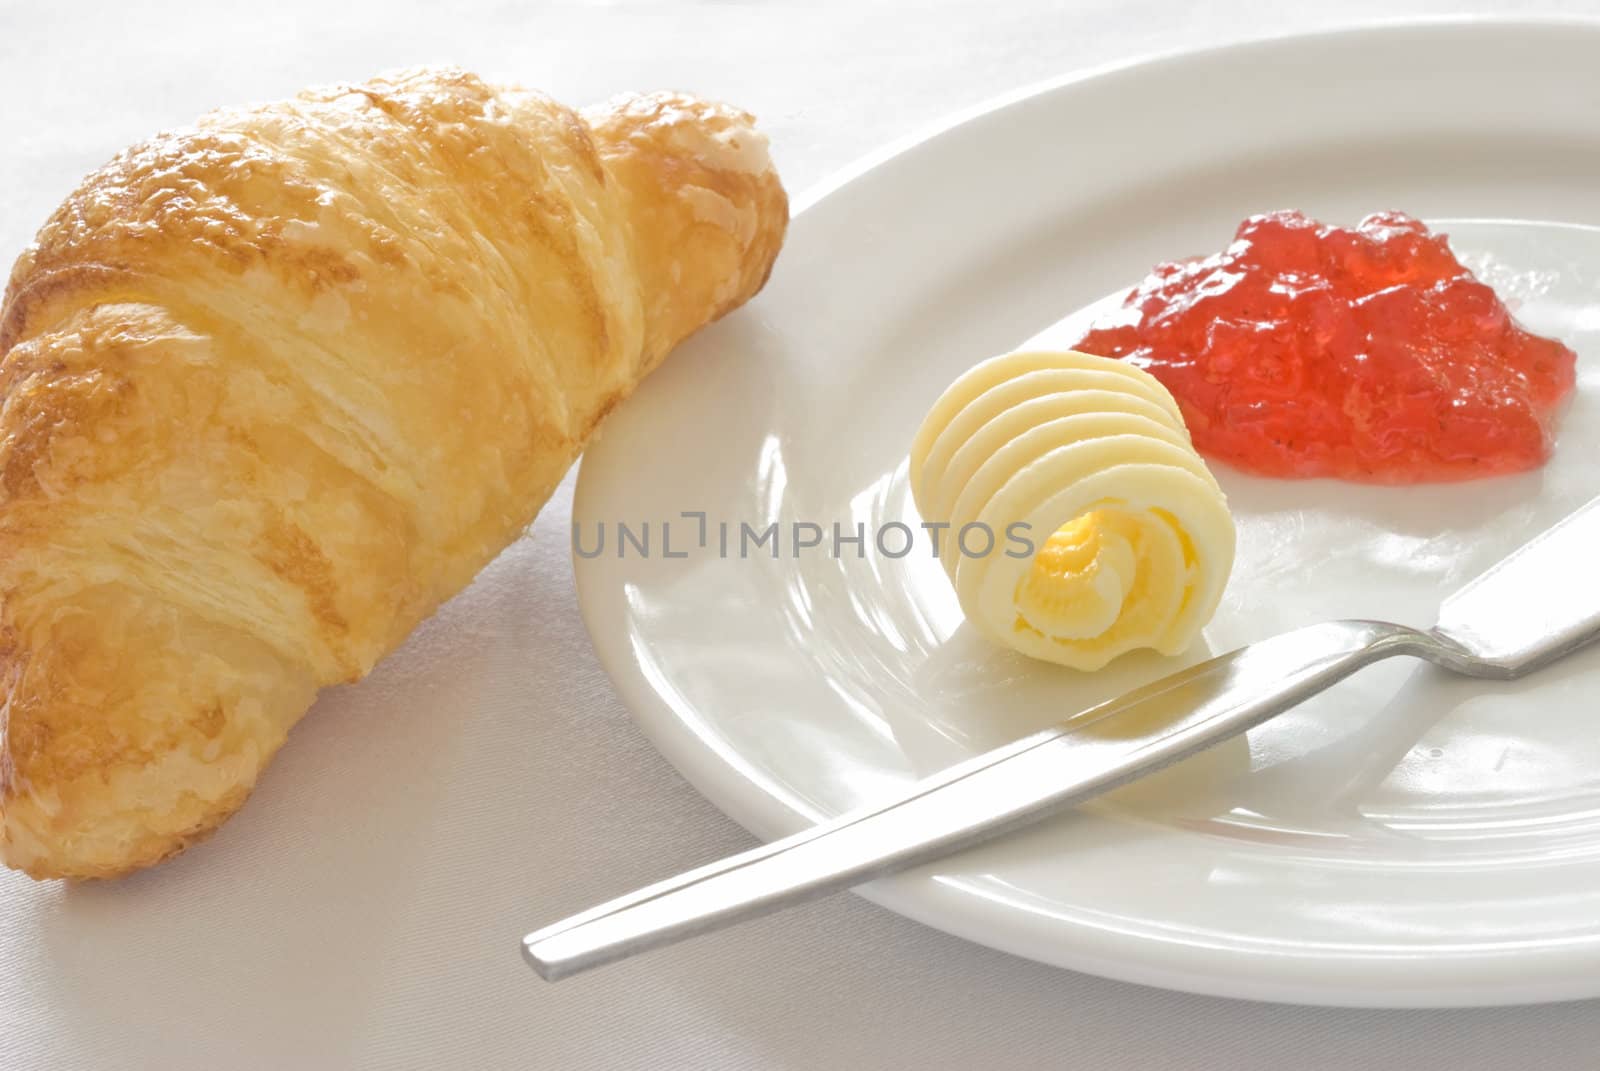 Croissant with butter and jam by ilgitano